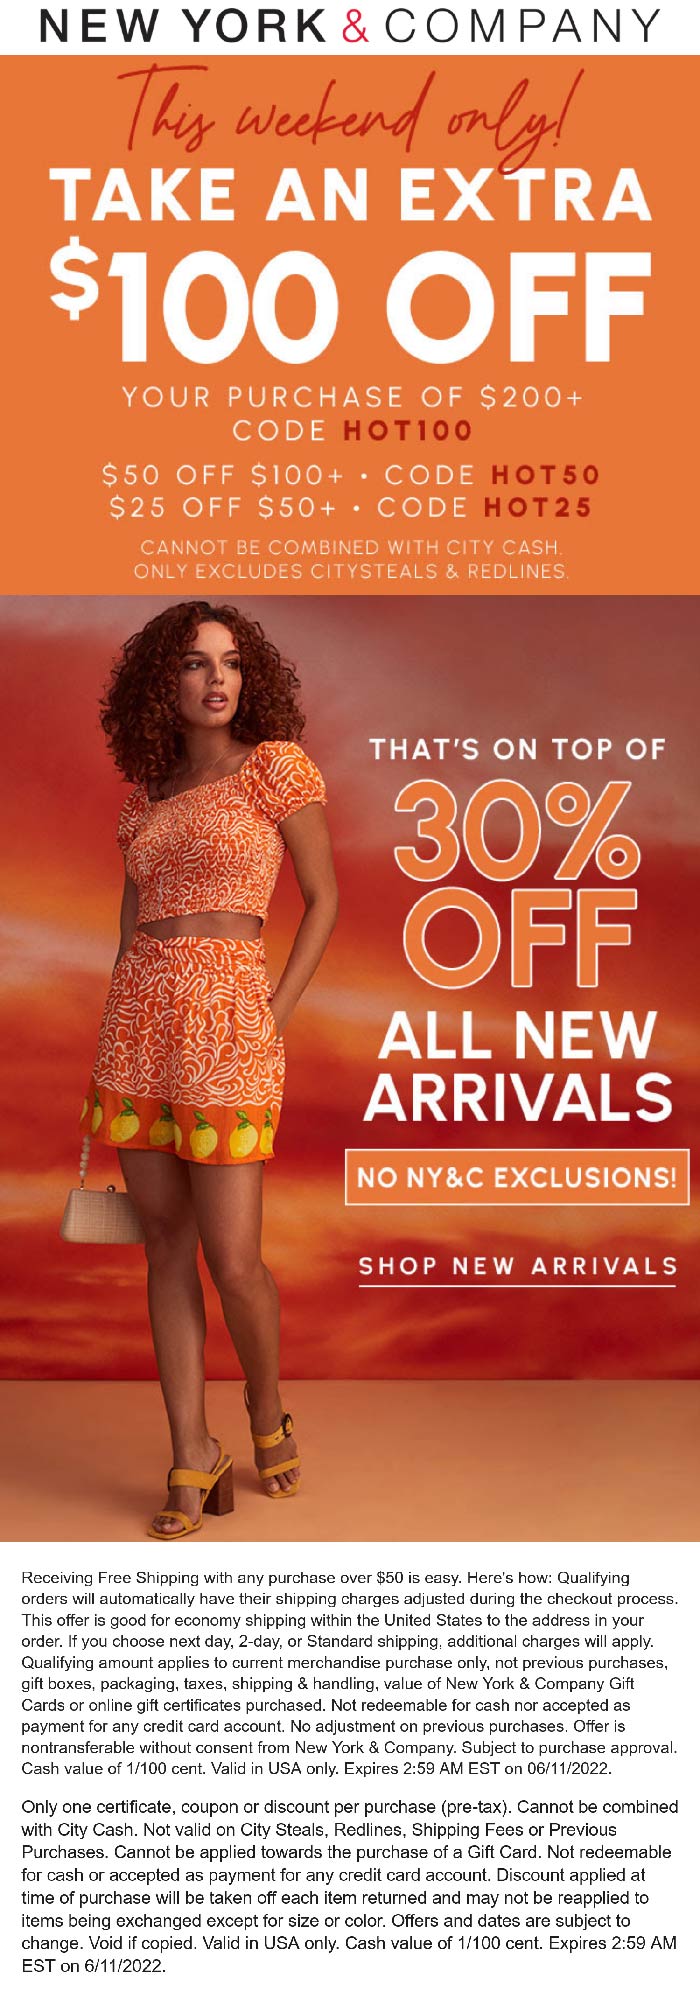 New York & Company stores Coupon  $25 off $50 & more at New York & Company via promo code HOT25 #newyorkcompany 